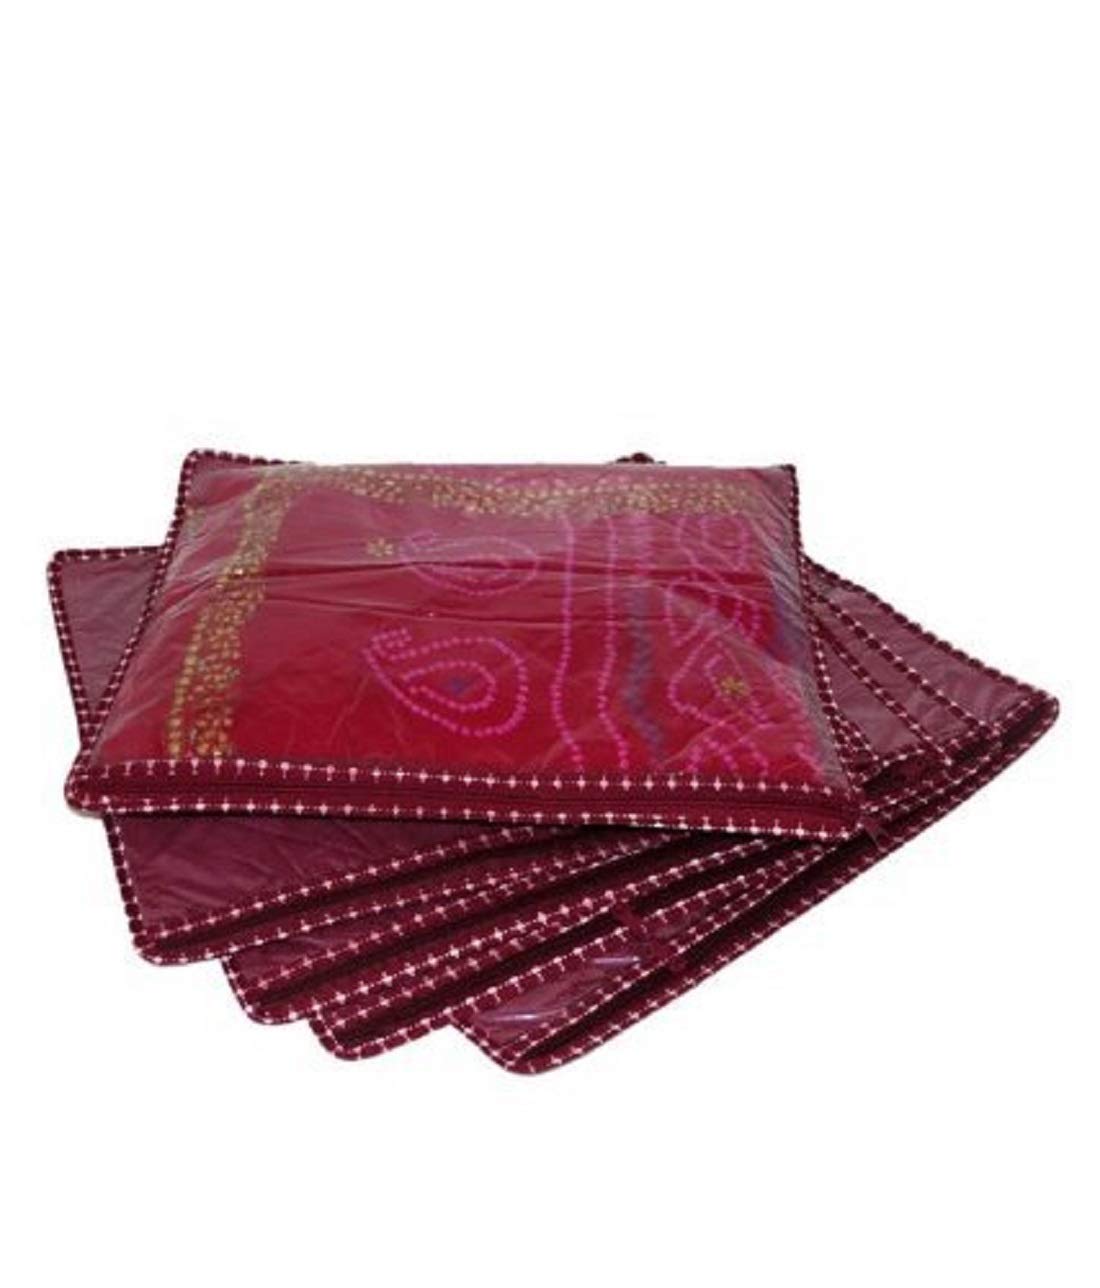 Kuber Industries Single Saree Covers With Zip|Saree Packing Covers For Wedding|Saree Cover Set Of 12 (Maroon)